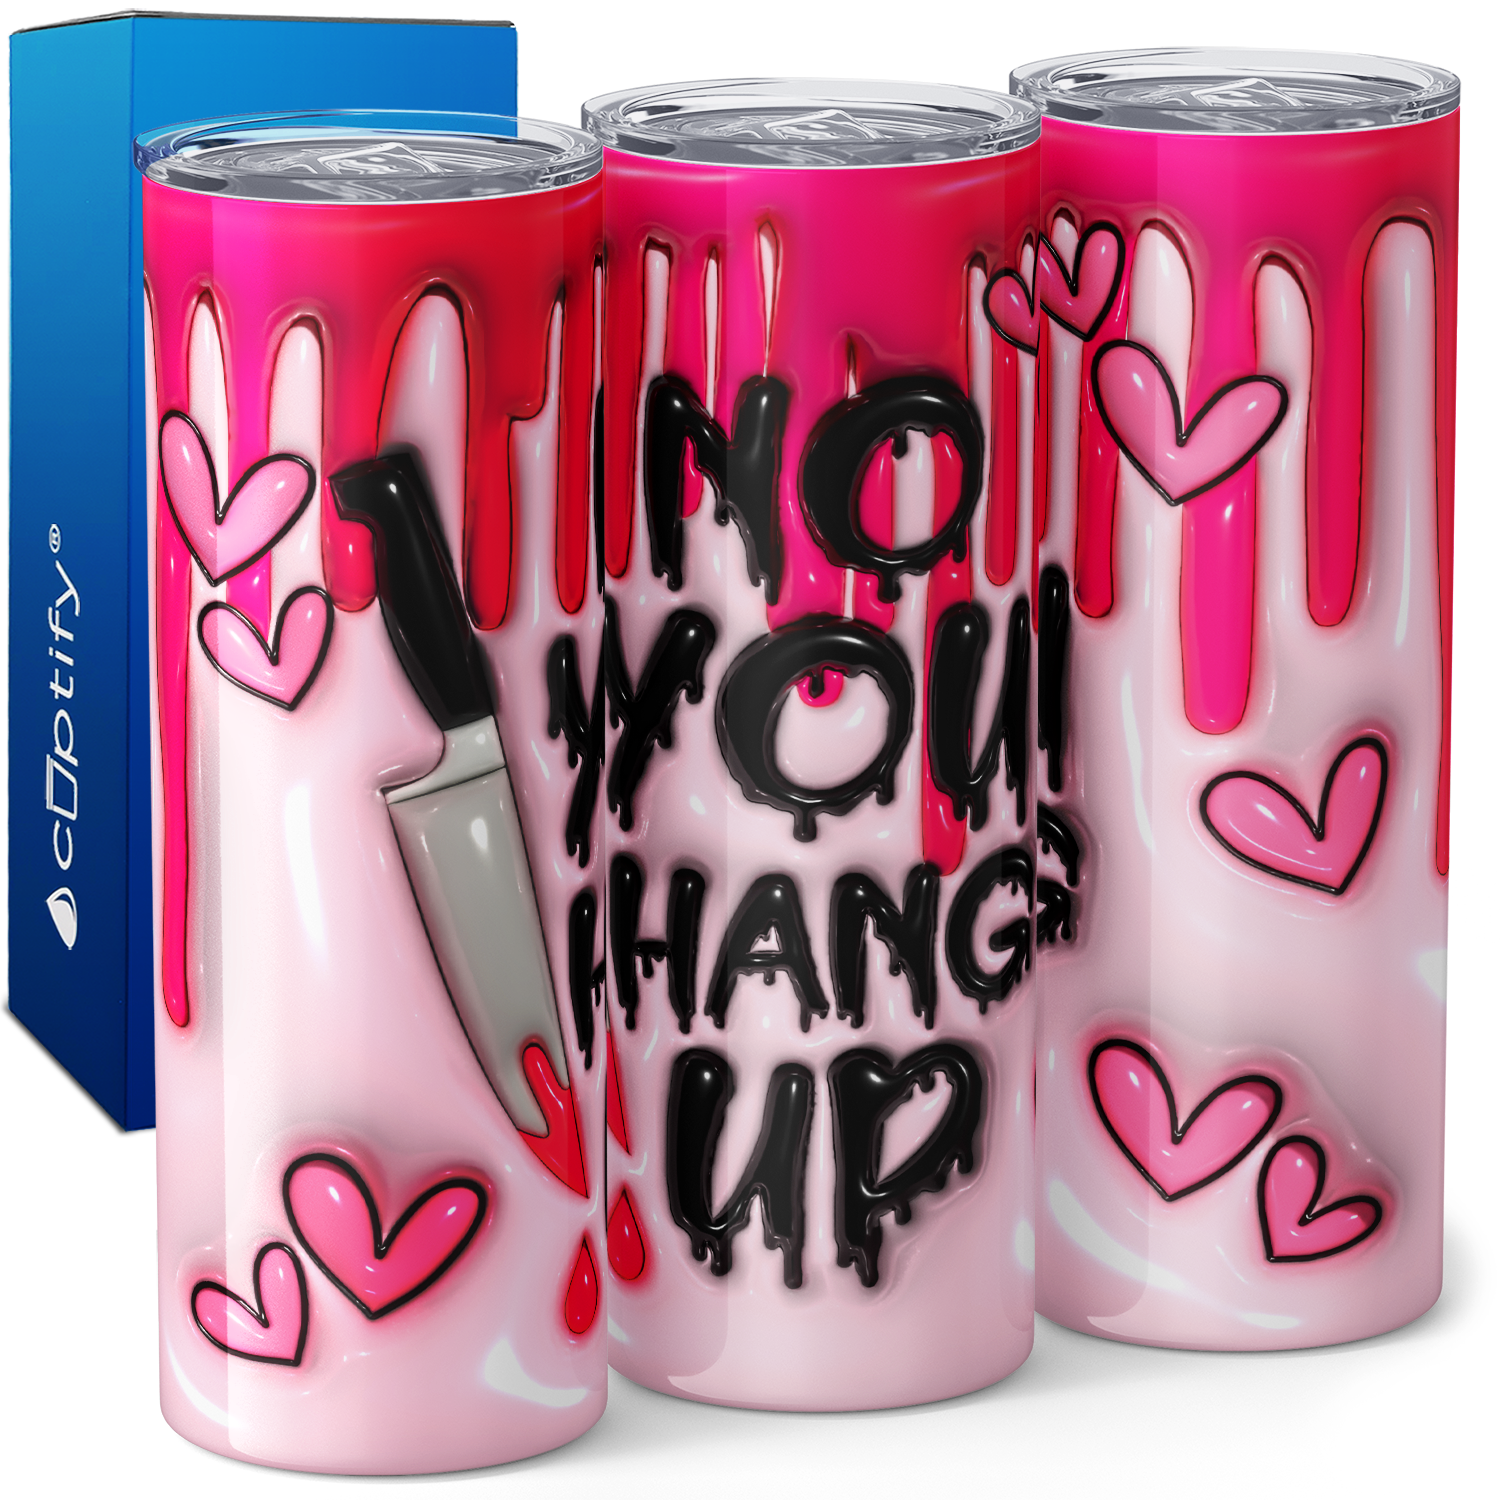 No You Hang Up Knife on Pink Inflated Balloon 20oz Skinny Tumbler